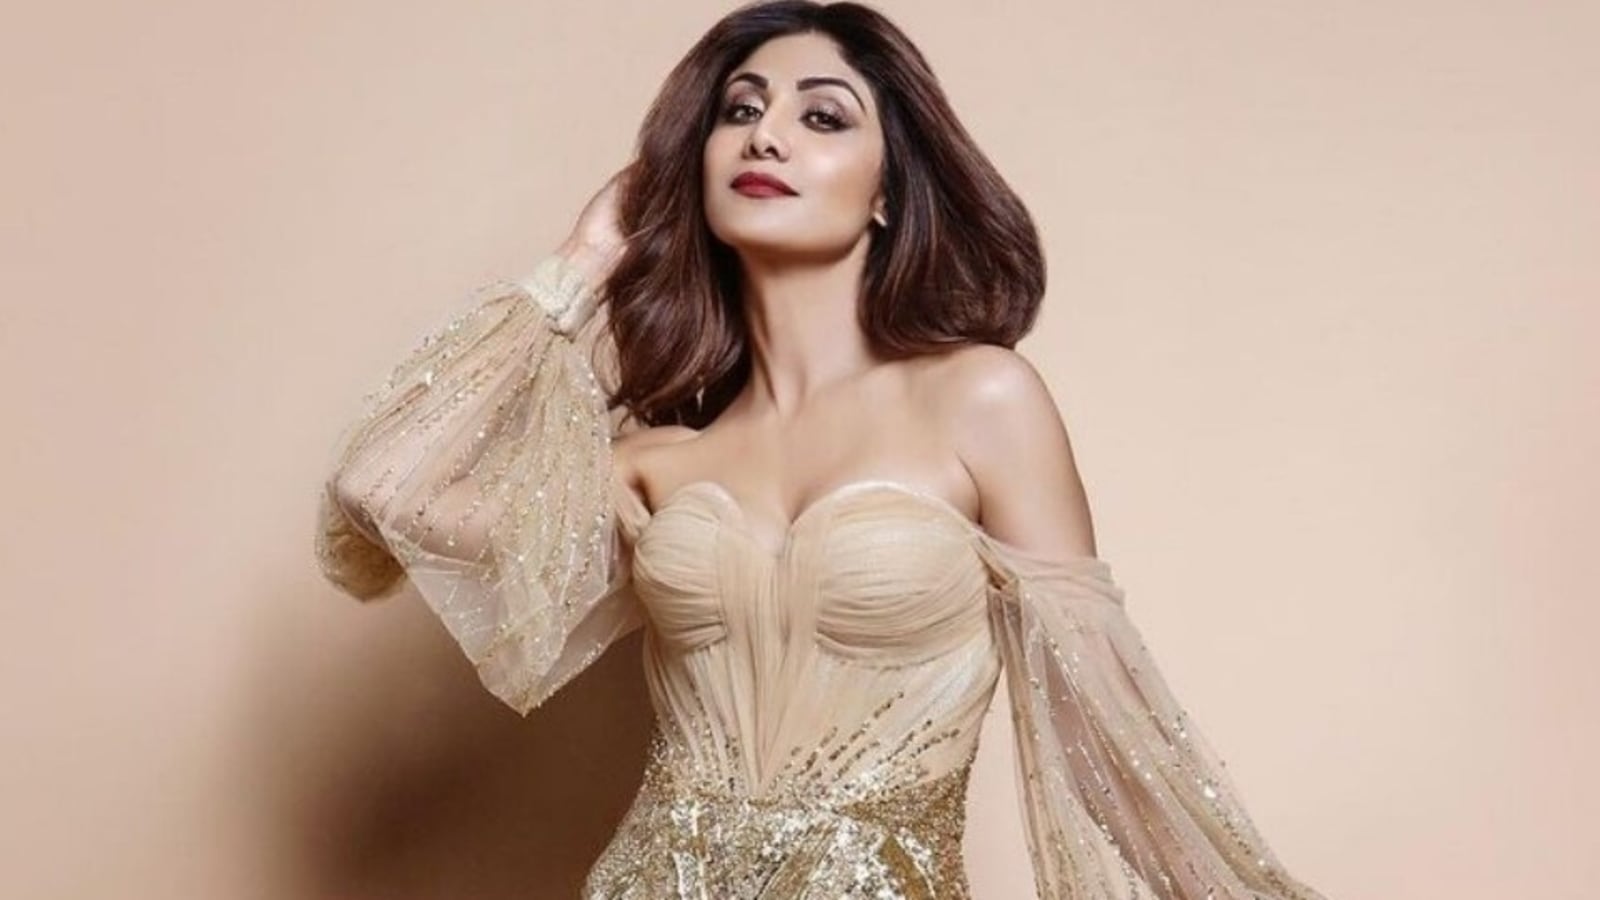 Shilpa Shetty Sex Picture - Sparkle on, darling: Shilpa Shetty in nude shimmery gown gives us a  retro-chic moment | Fashion Trends - Hindustan Times